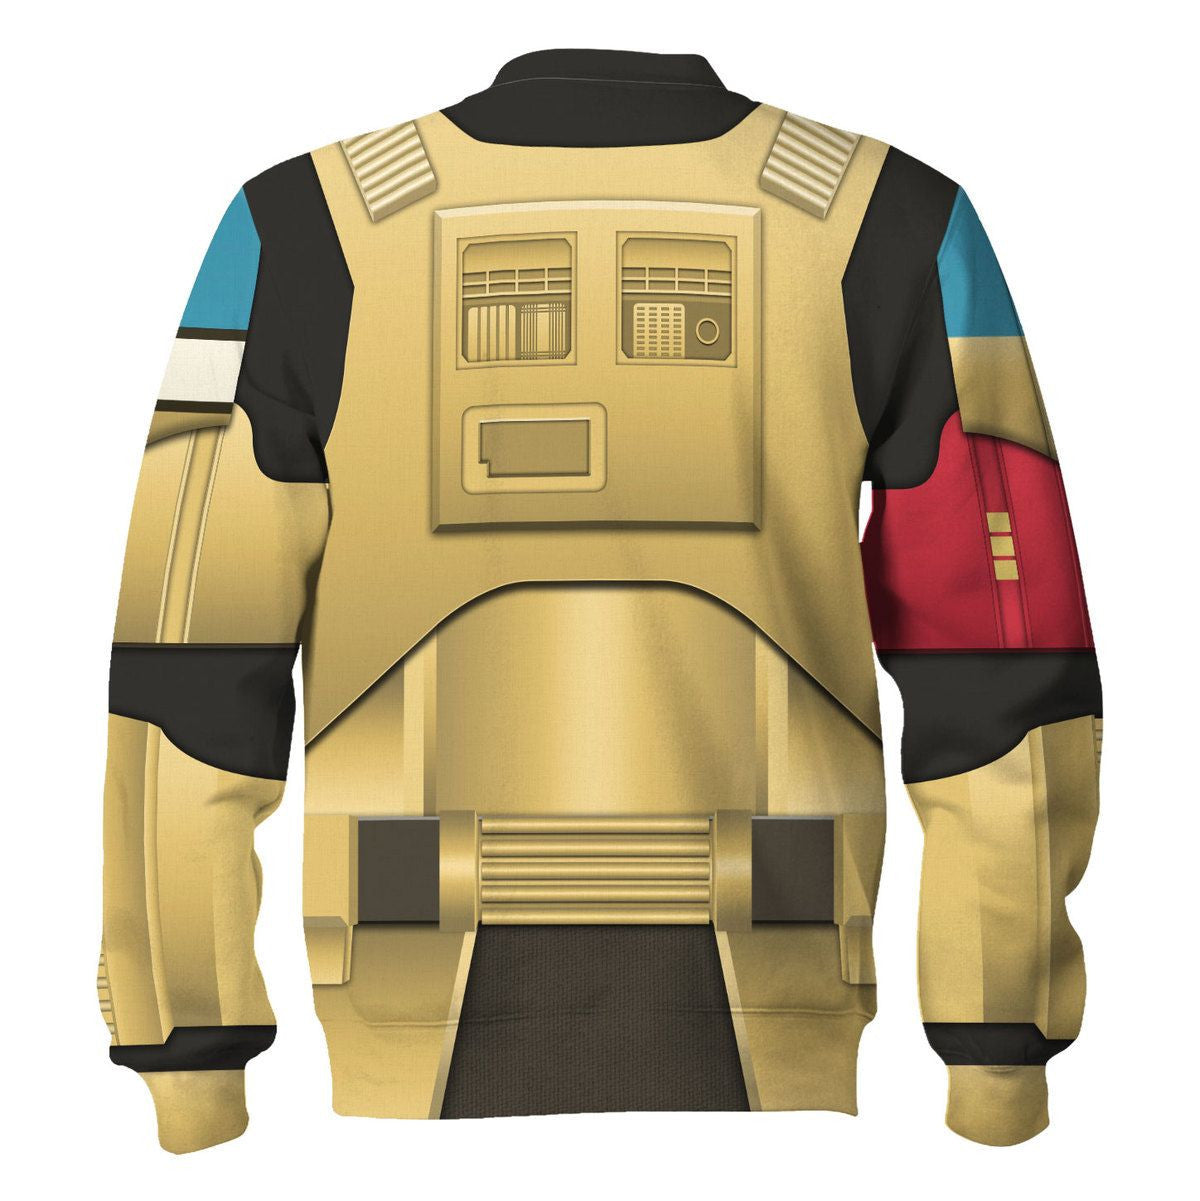 Star Wars Shore Troopers Costume - Sweater - Ugly Christmas Sweater